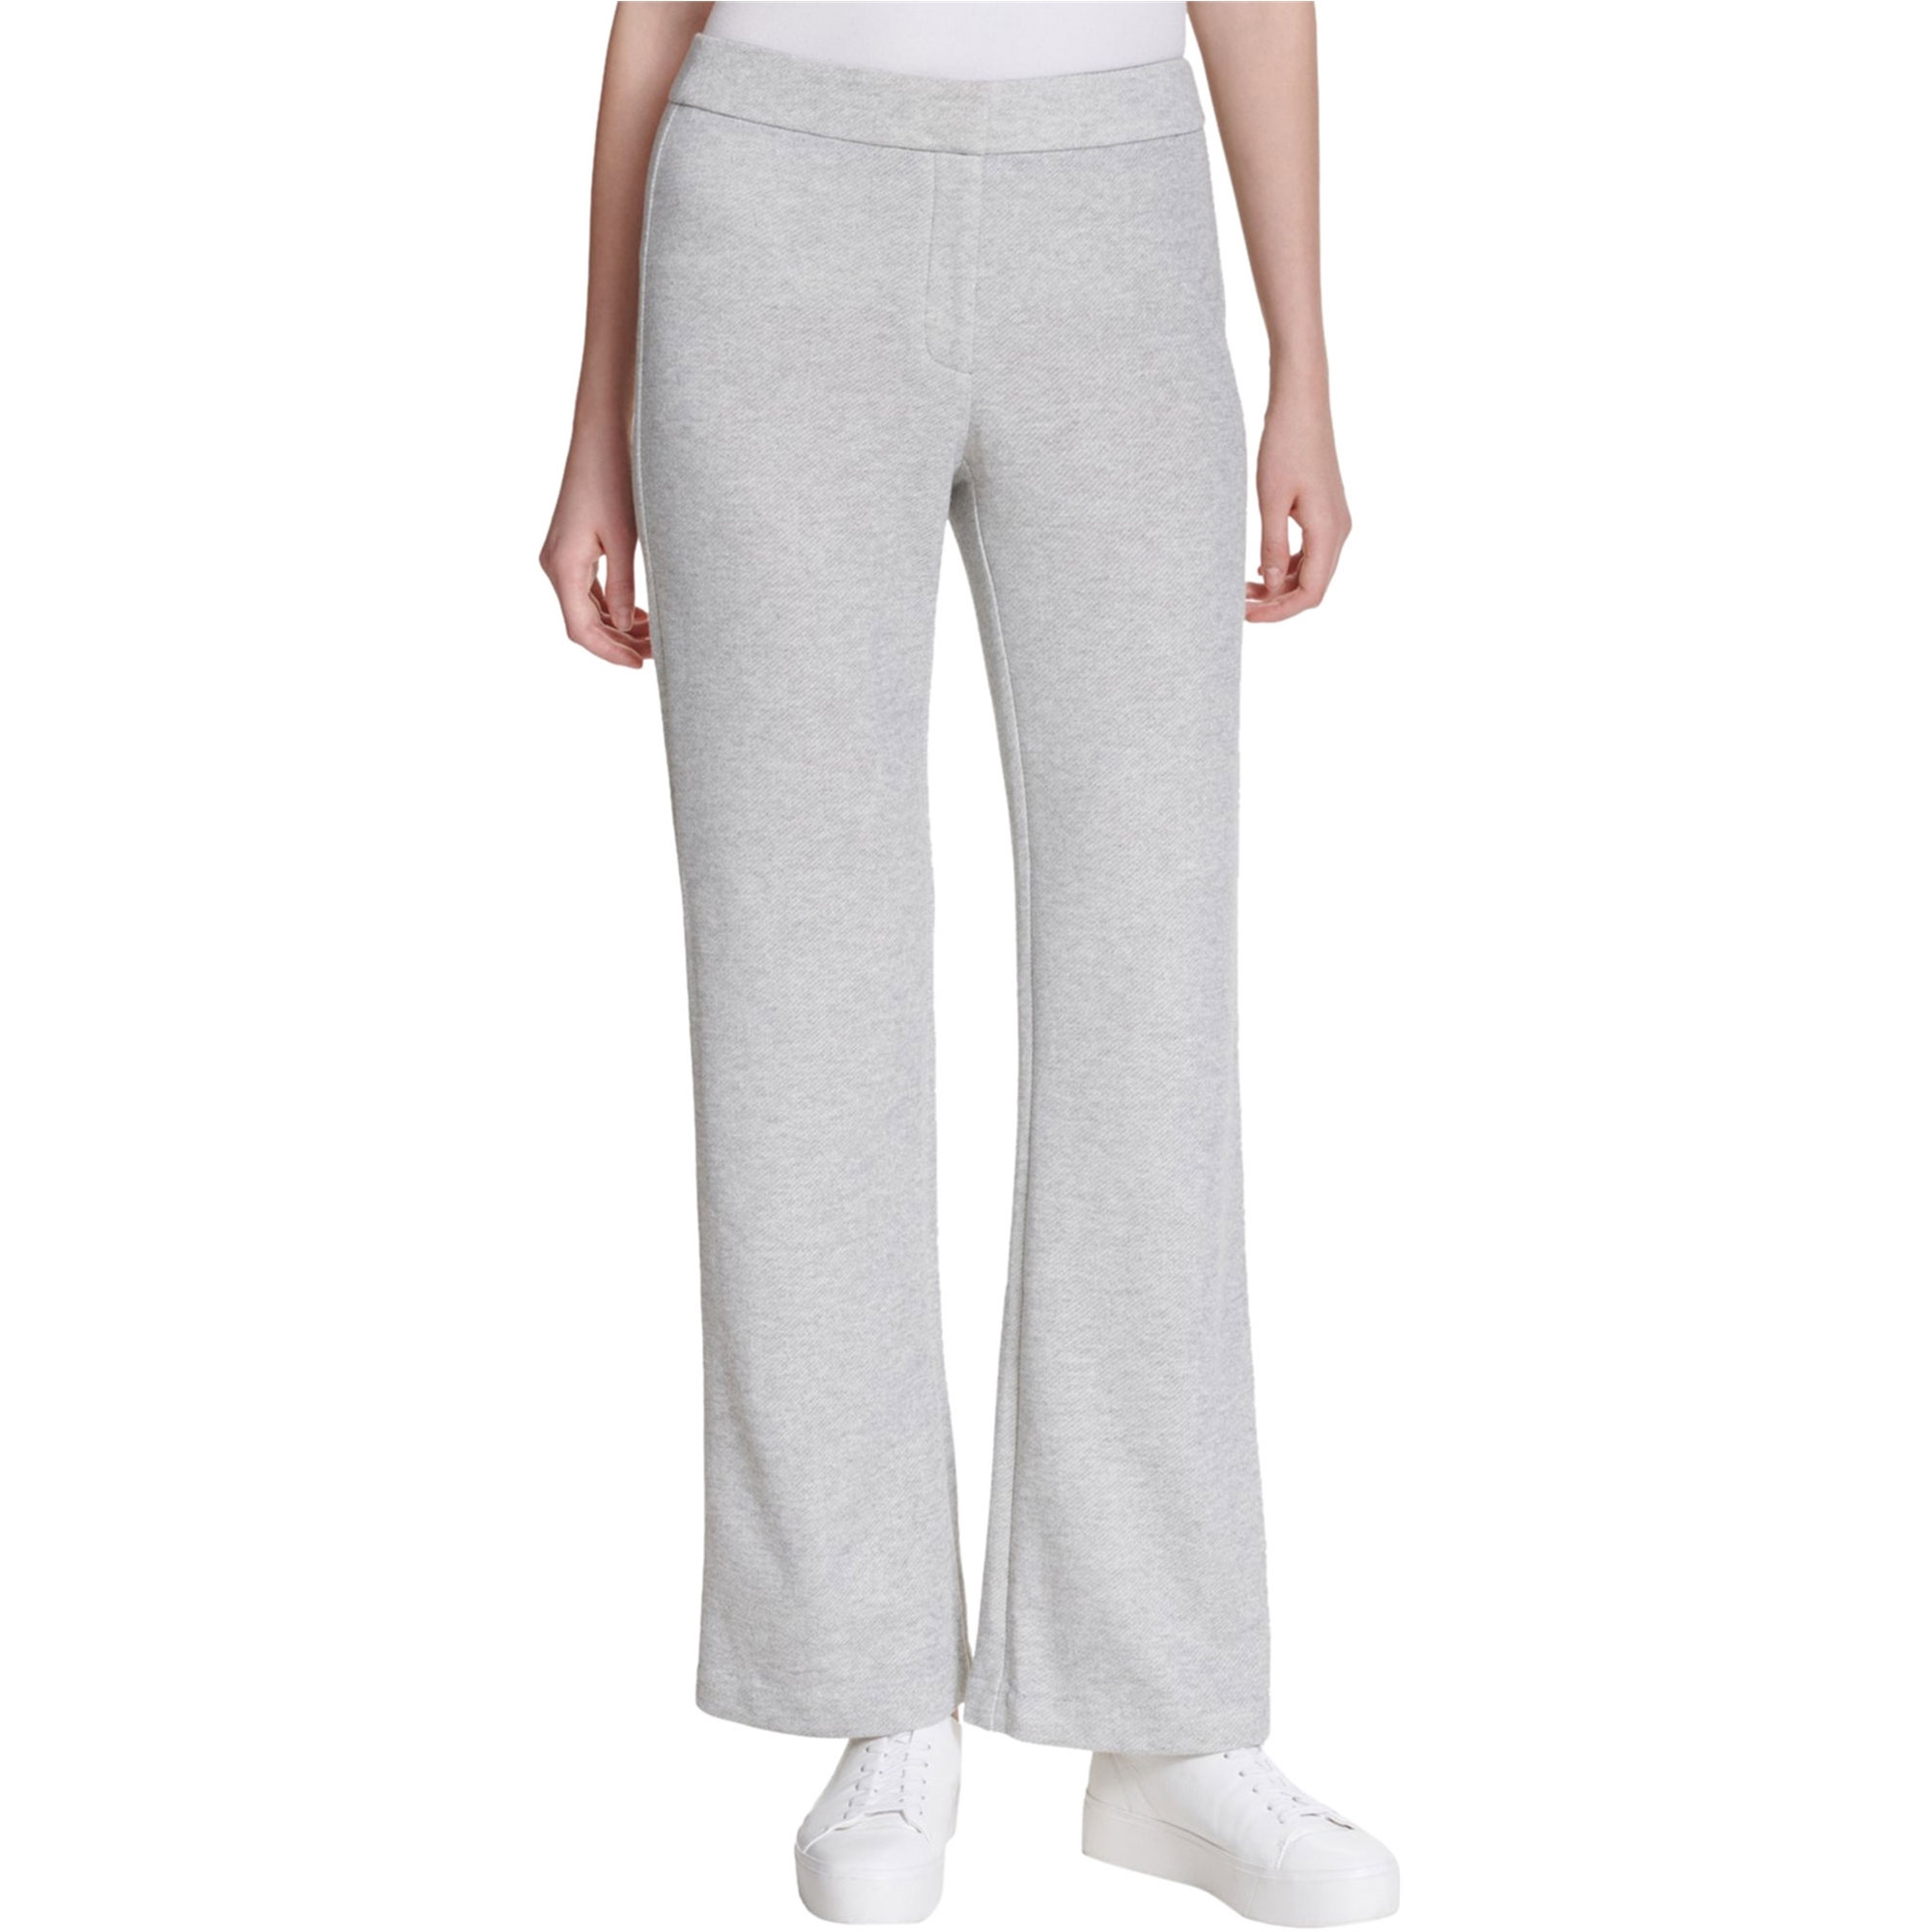 Buy a Womens Calvin Klein Heathered Casual Wide Leg Pants Online |  TagsWeekly.com